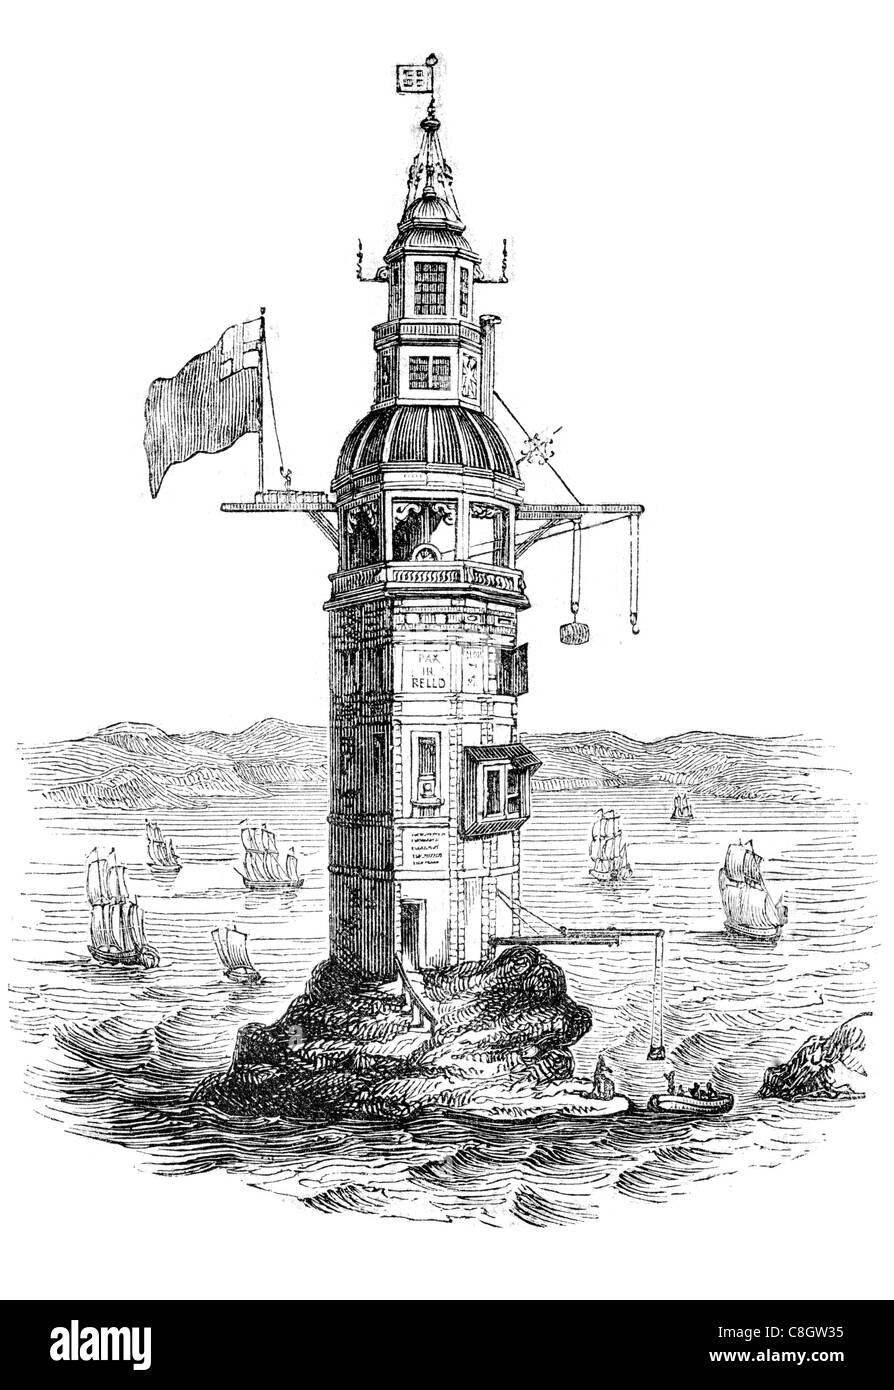 first Winstanley's lighthouse Eddystone Rocks octagonal wooden structure Henry Winstanley 1696 1698 French privateer prisoner Stock Photo